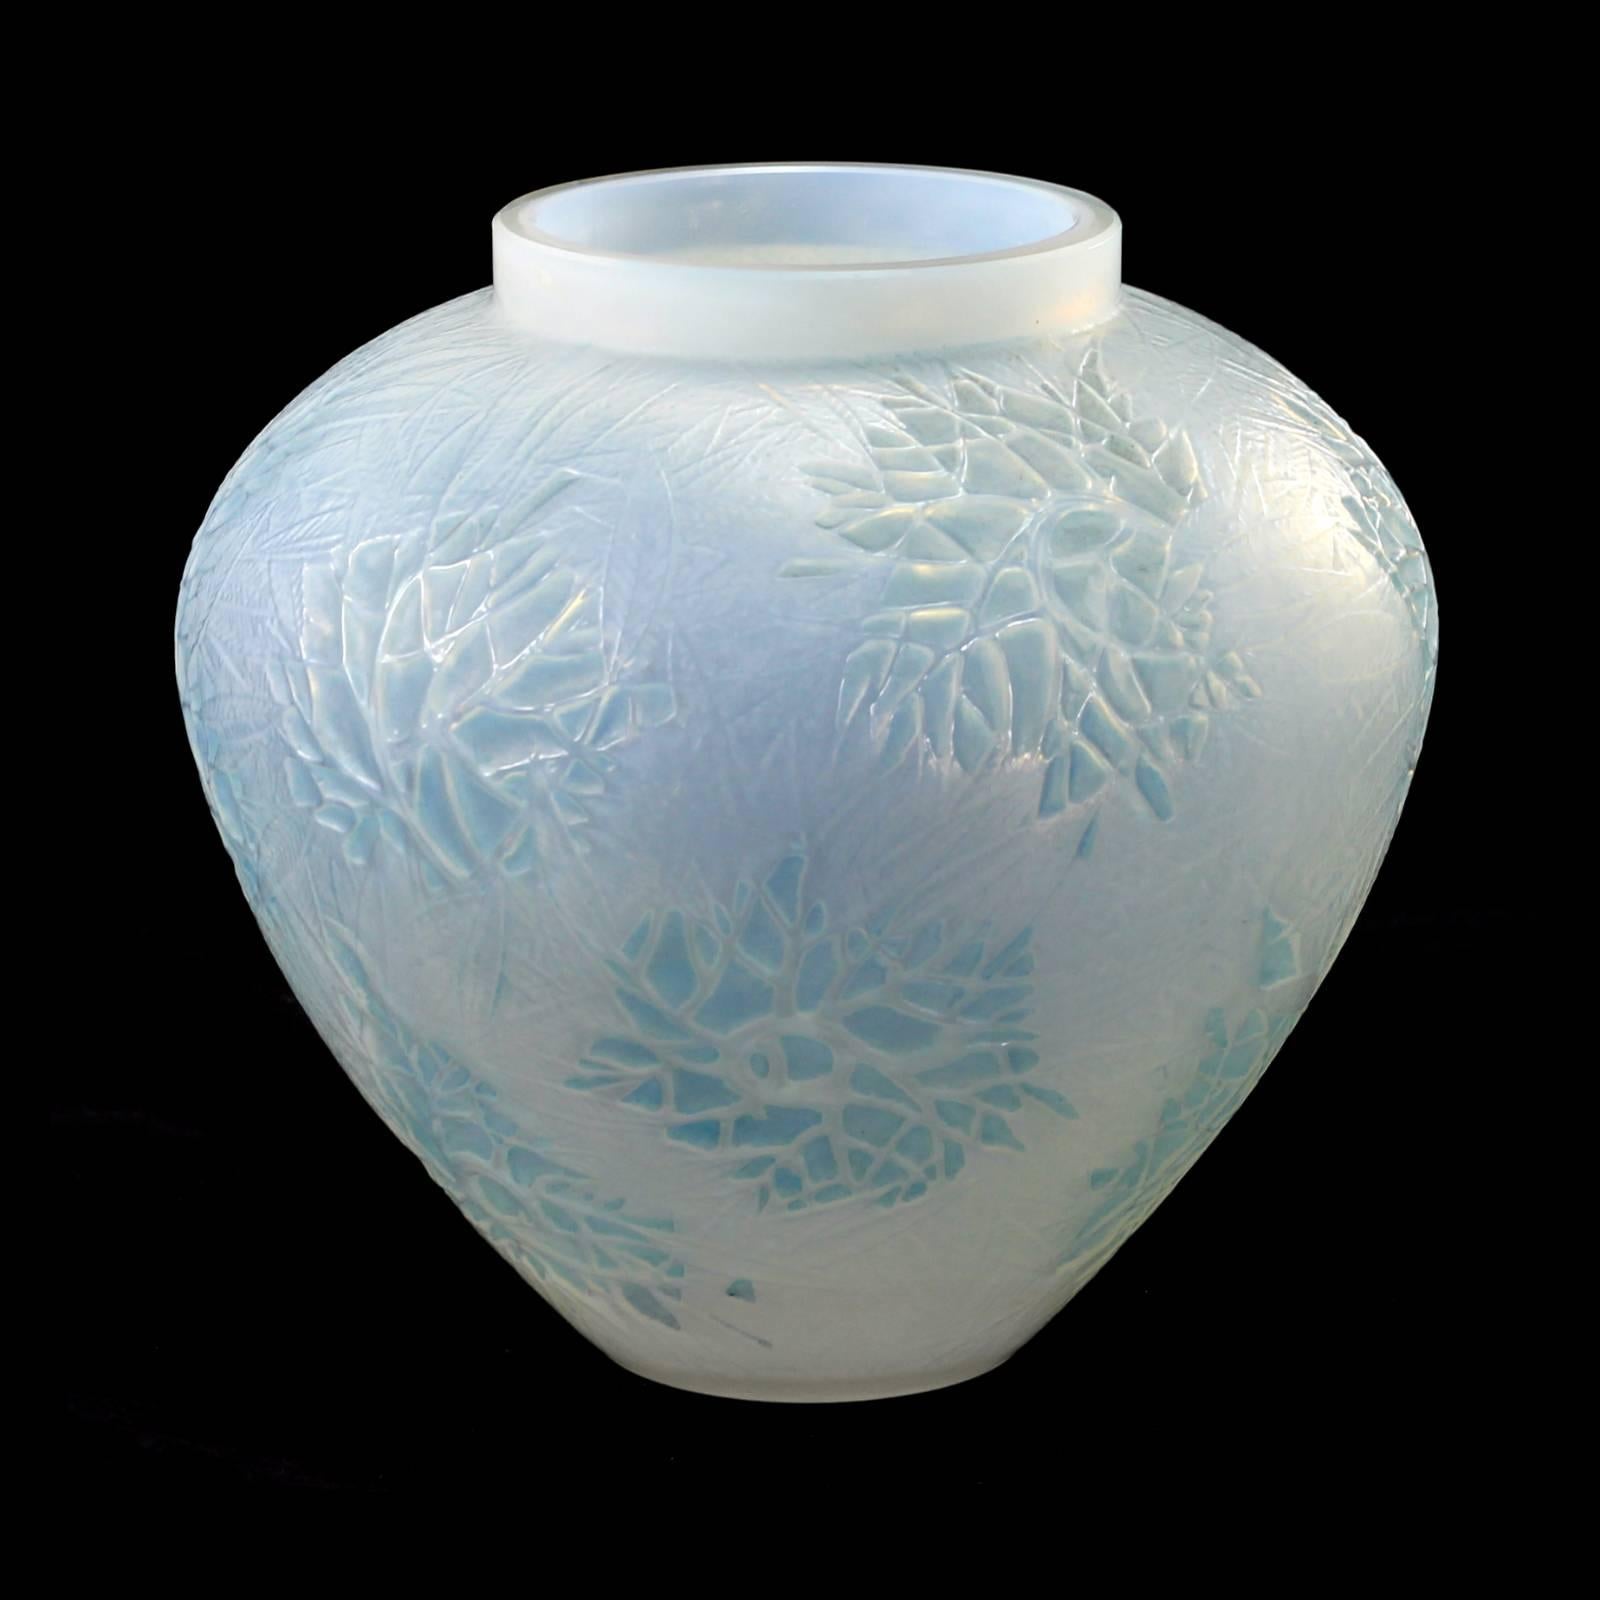 An early 20th century Art Deco glass vase completed in the 'Esterel' pattern by French glassmaker René Lalique. The white opalescent glass is decorated in an asymmetrical leaf pattern, which has been patinated in a light blue color. The piece is